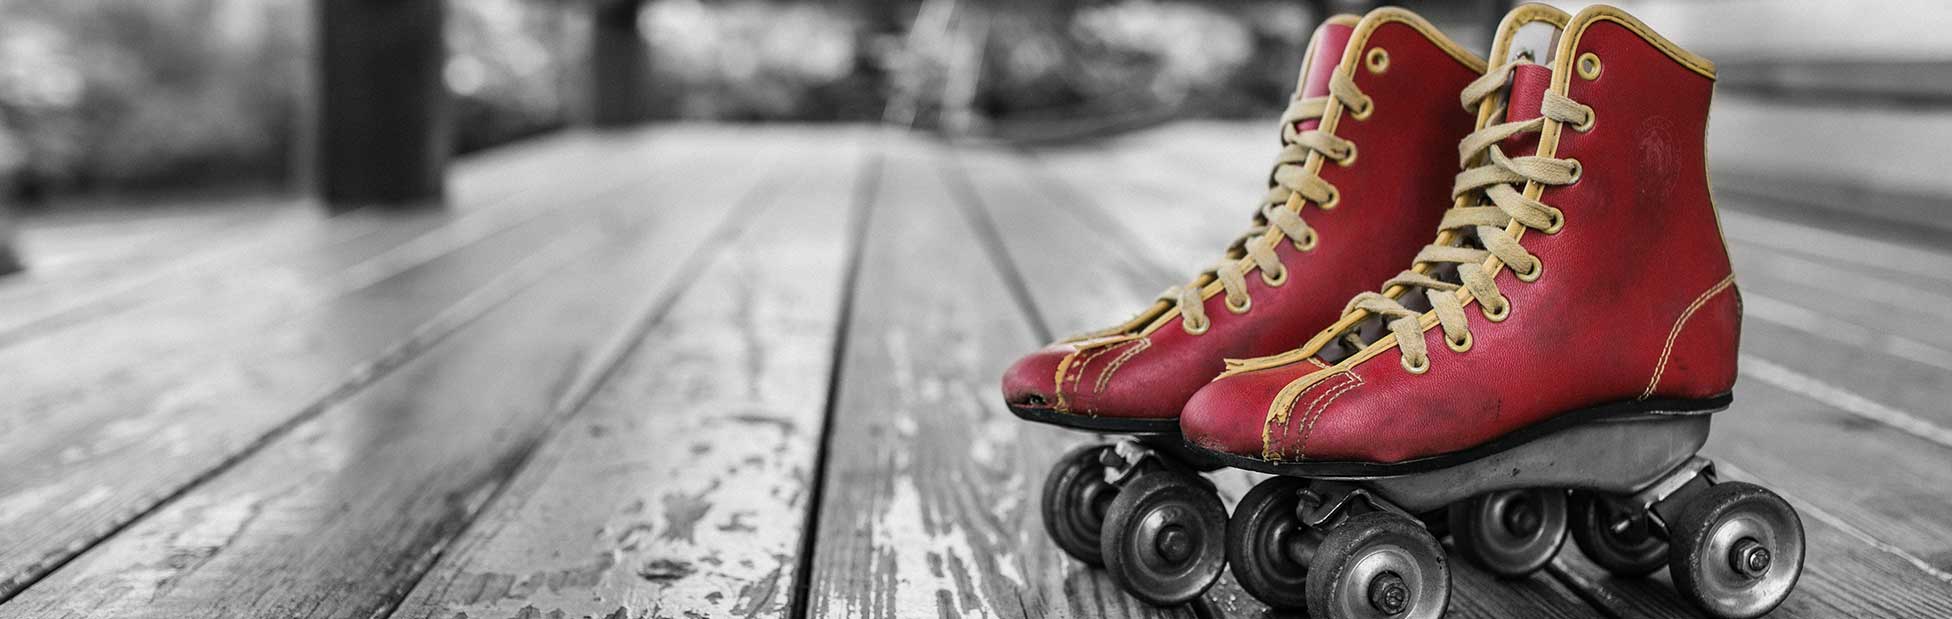 Image of a red pair of roller skates